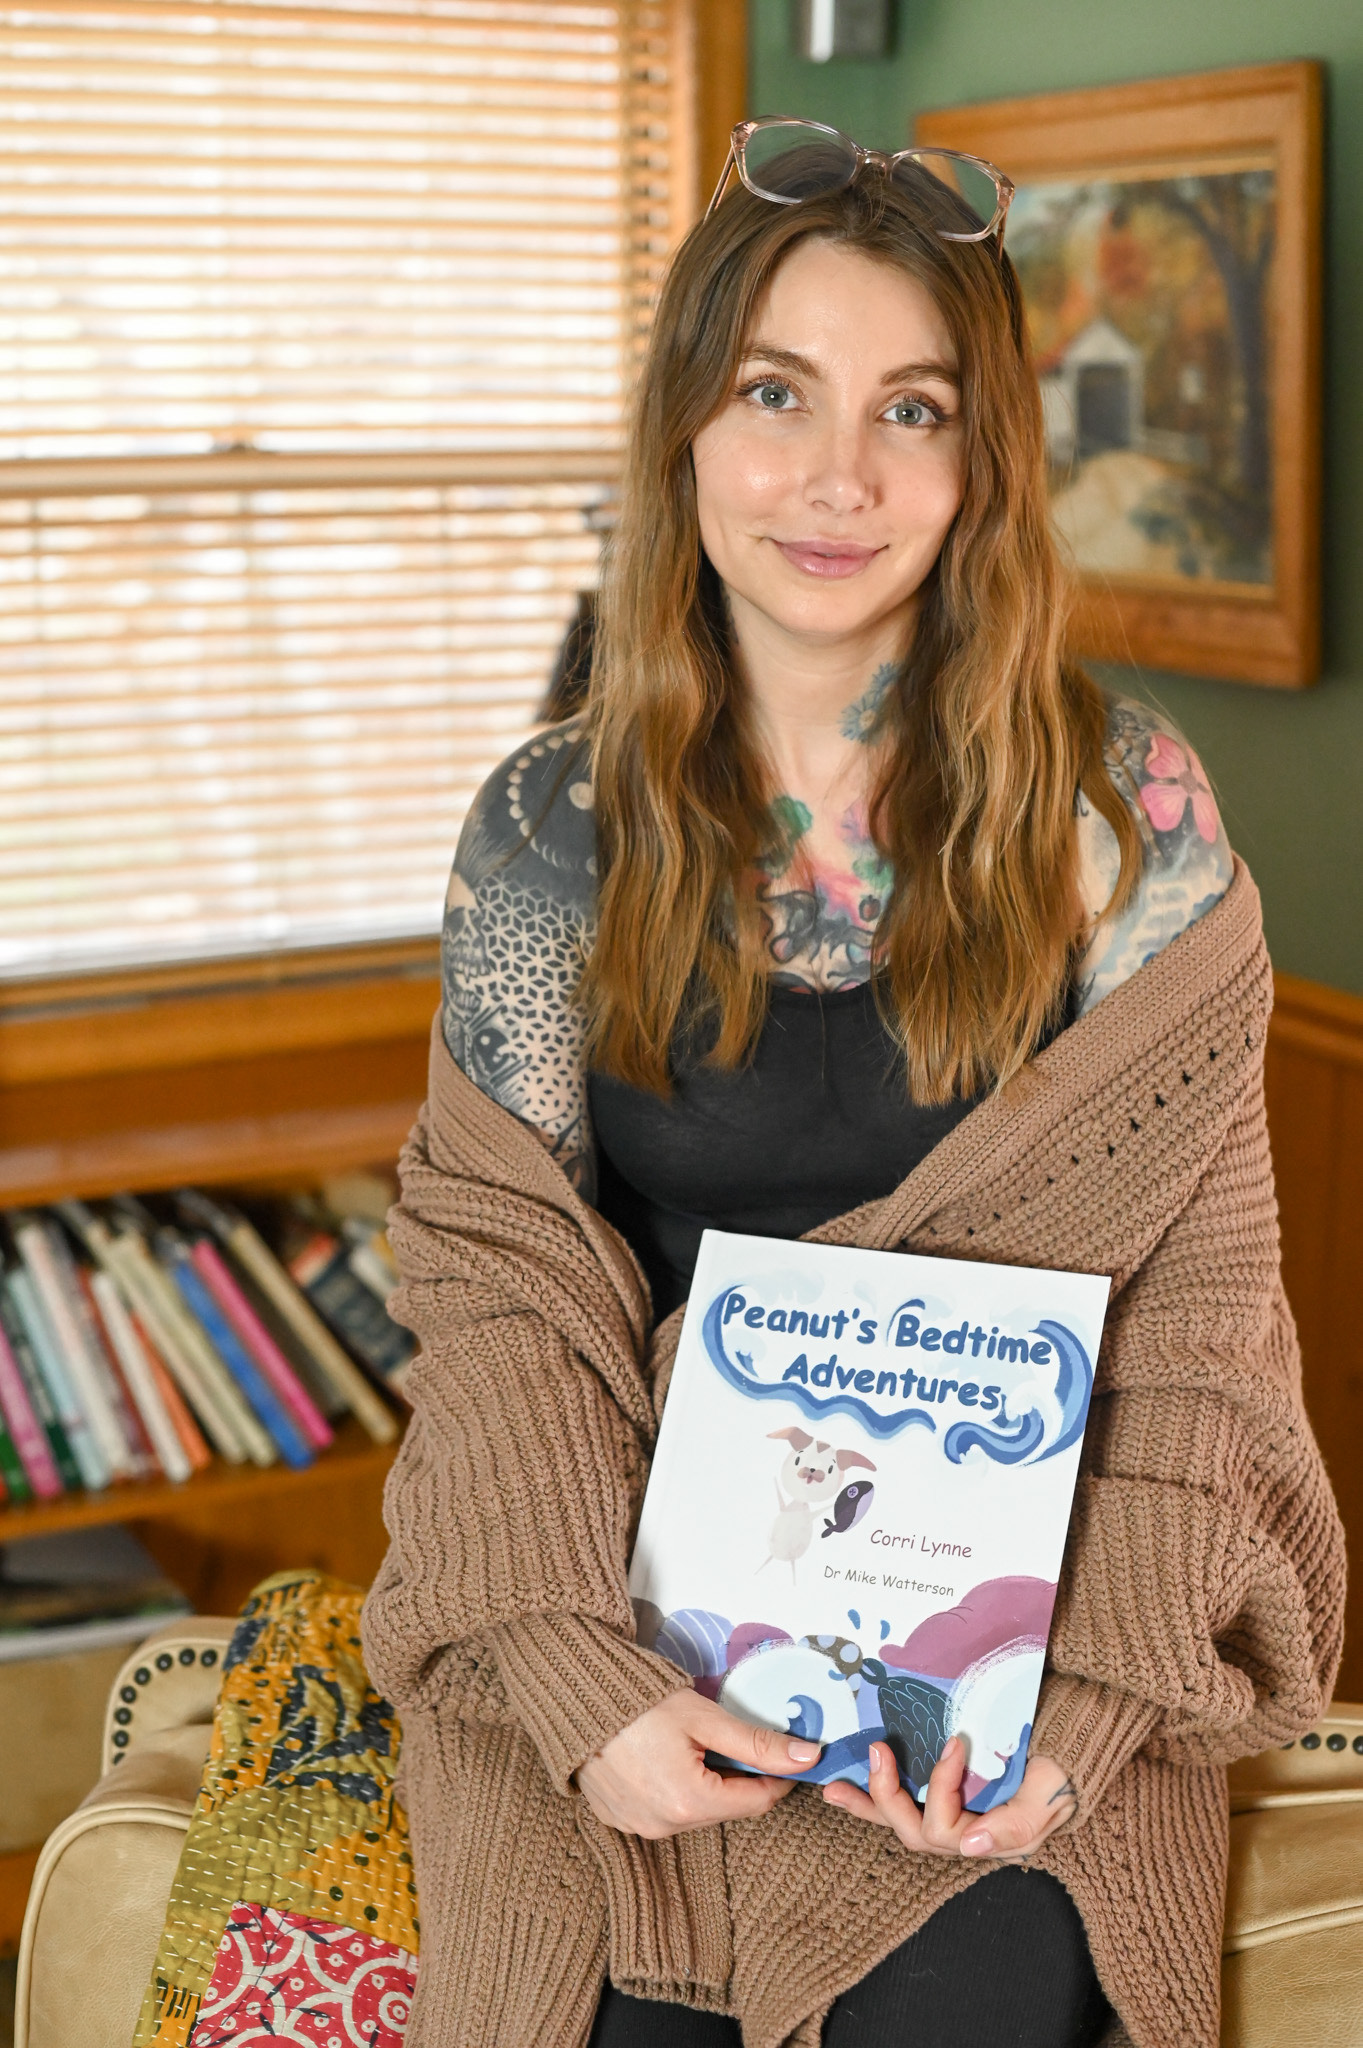 Local author, Corri Lynne, poses with her picture book, Peanut's Bedtime Adventures.